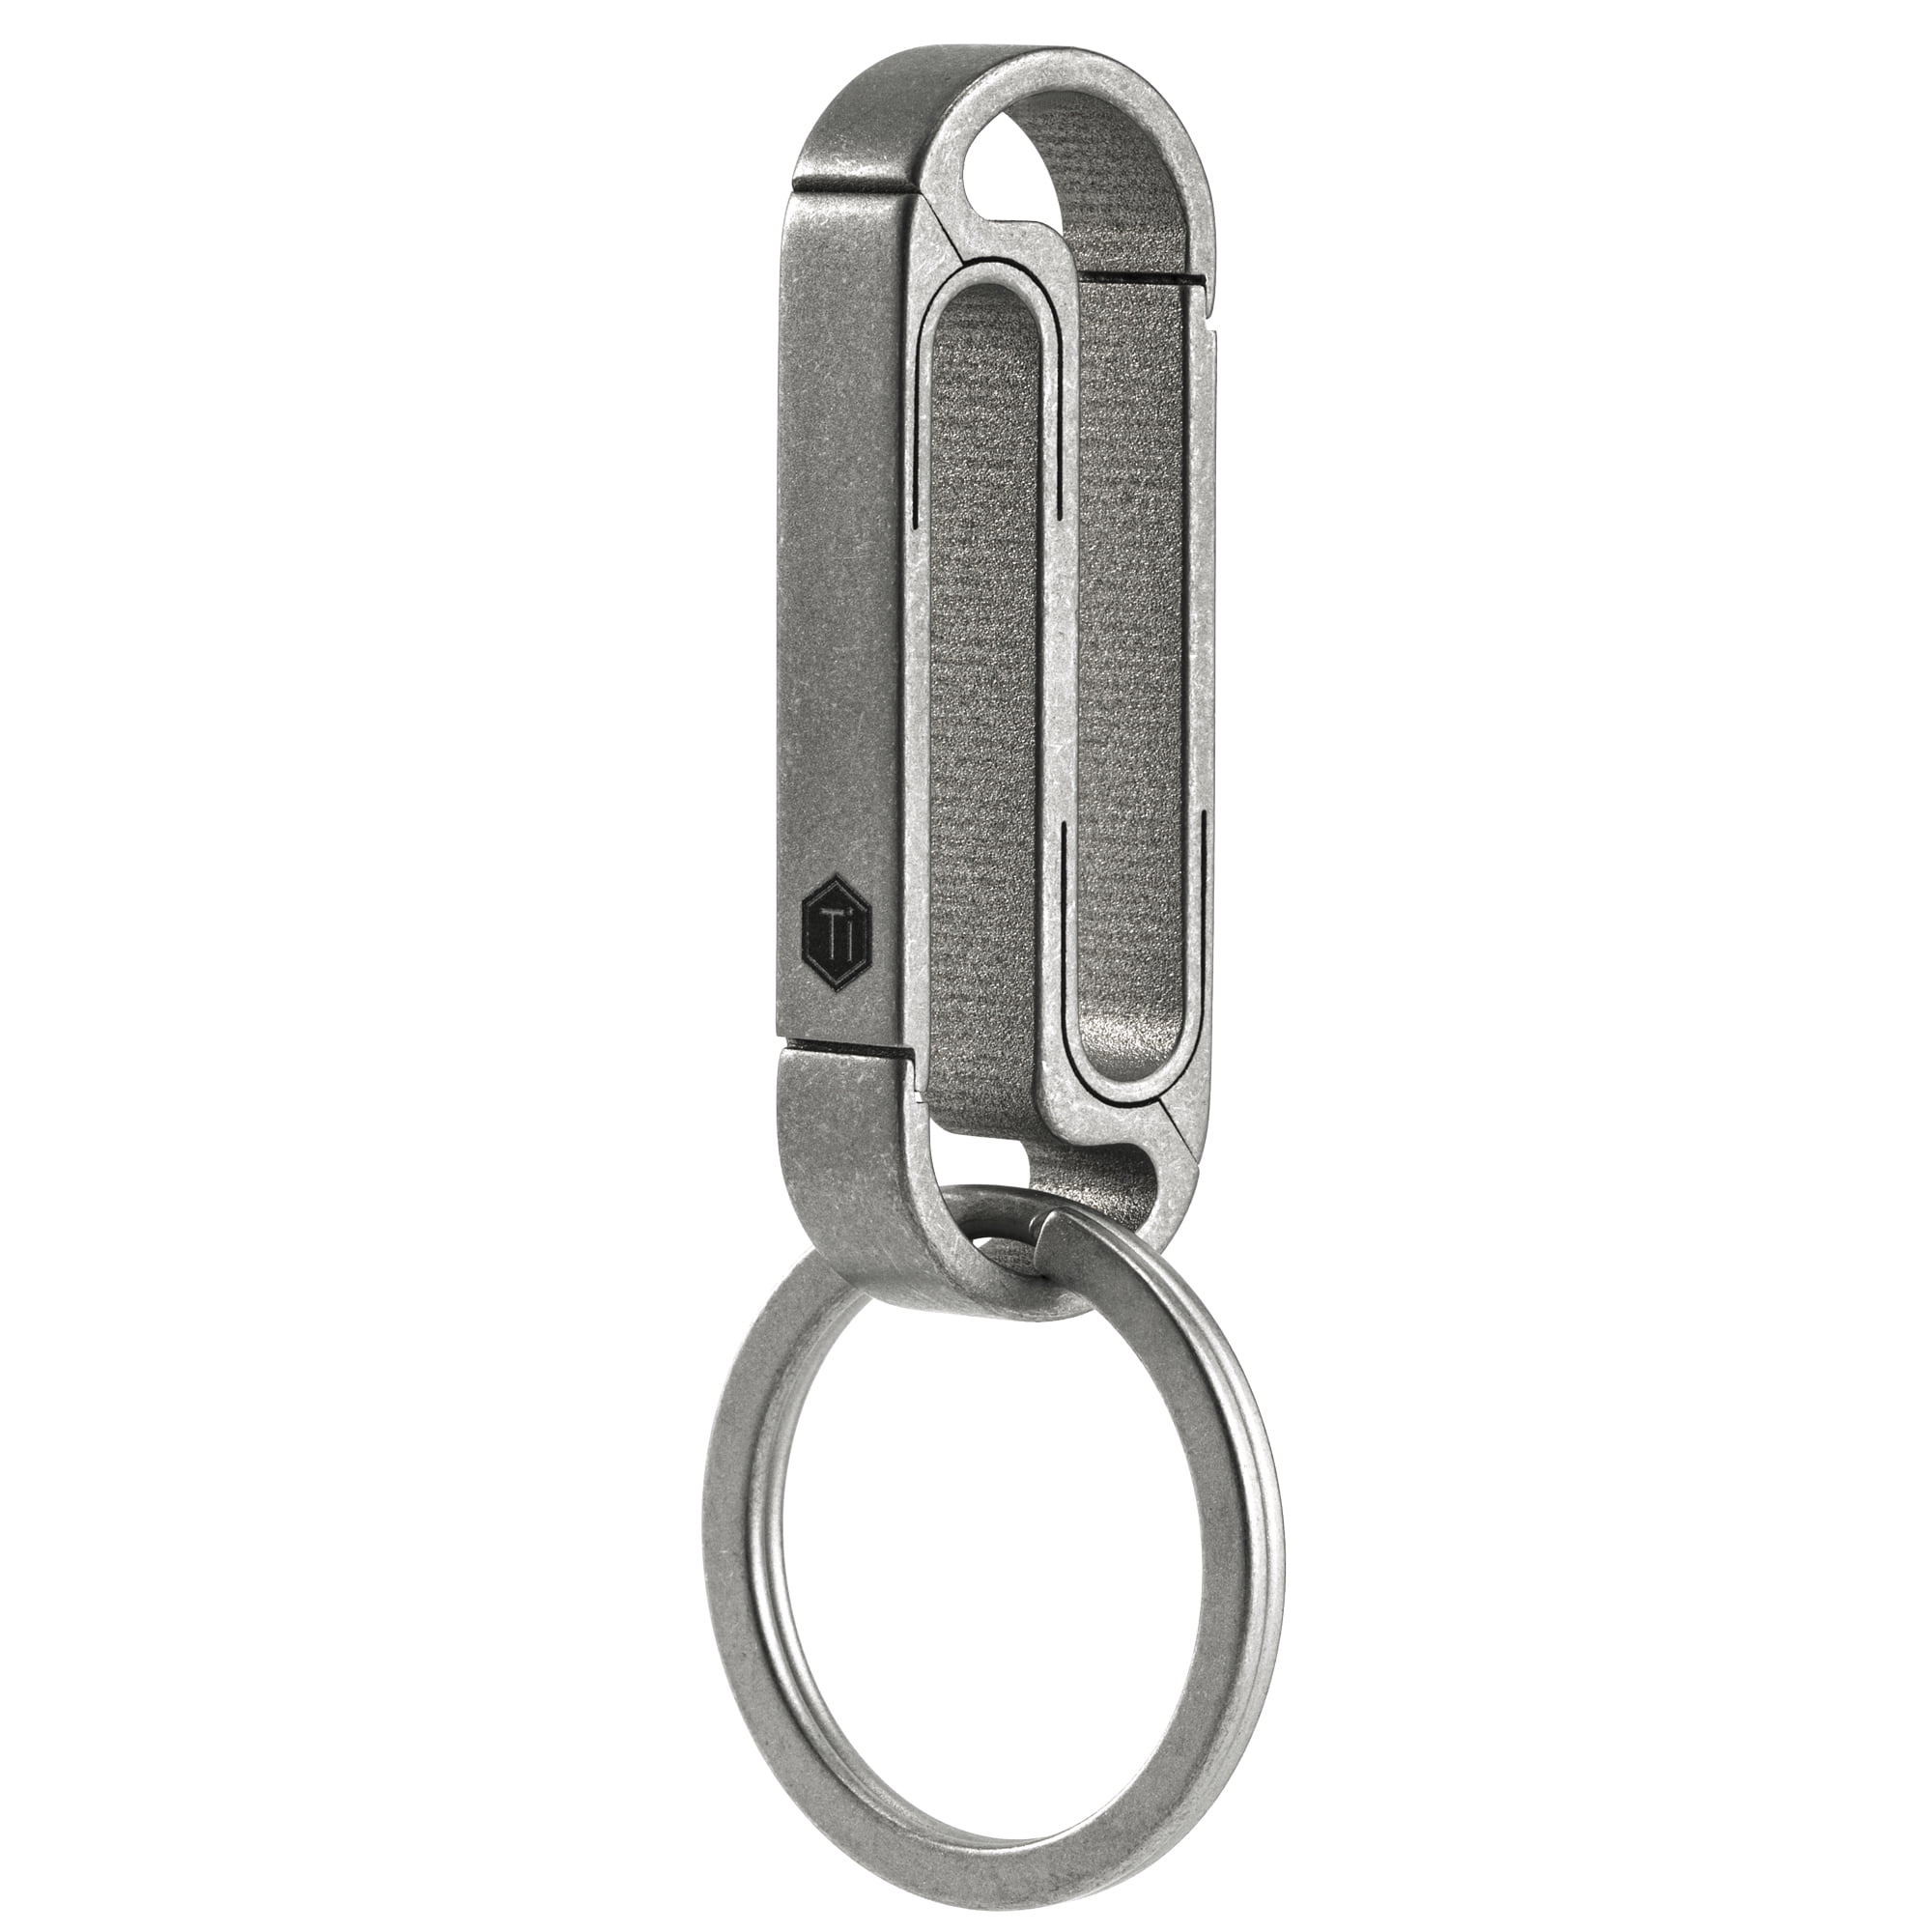 FEGVE Titanium Quick Release Key Chain Clip with 4 Key Rings Heavy Duty Small Carabiner Keychain Clip for Men and Women (Grey)